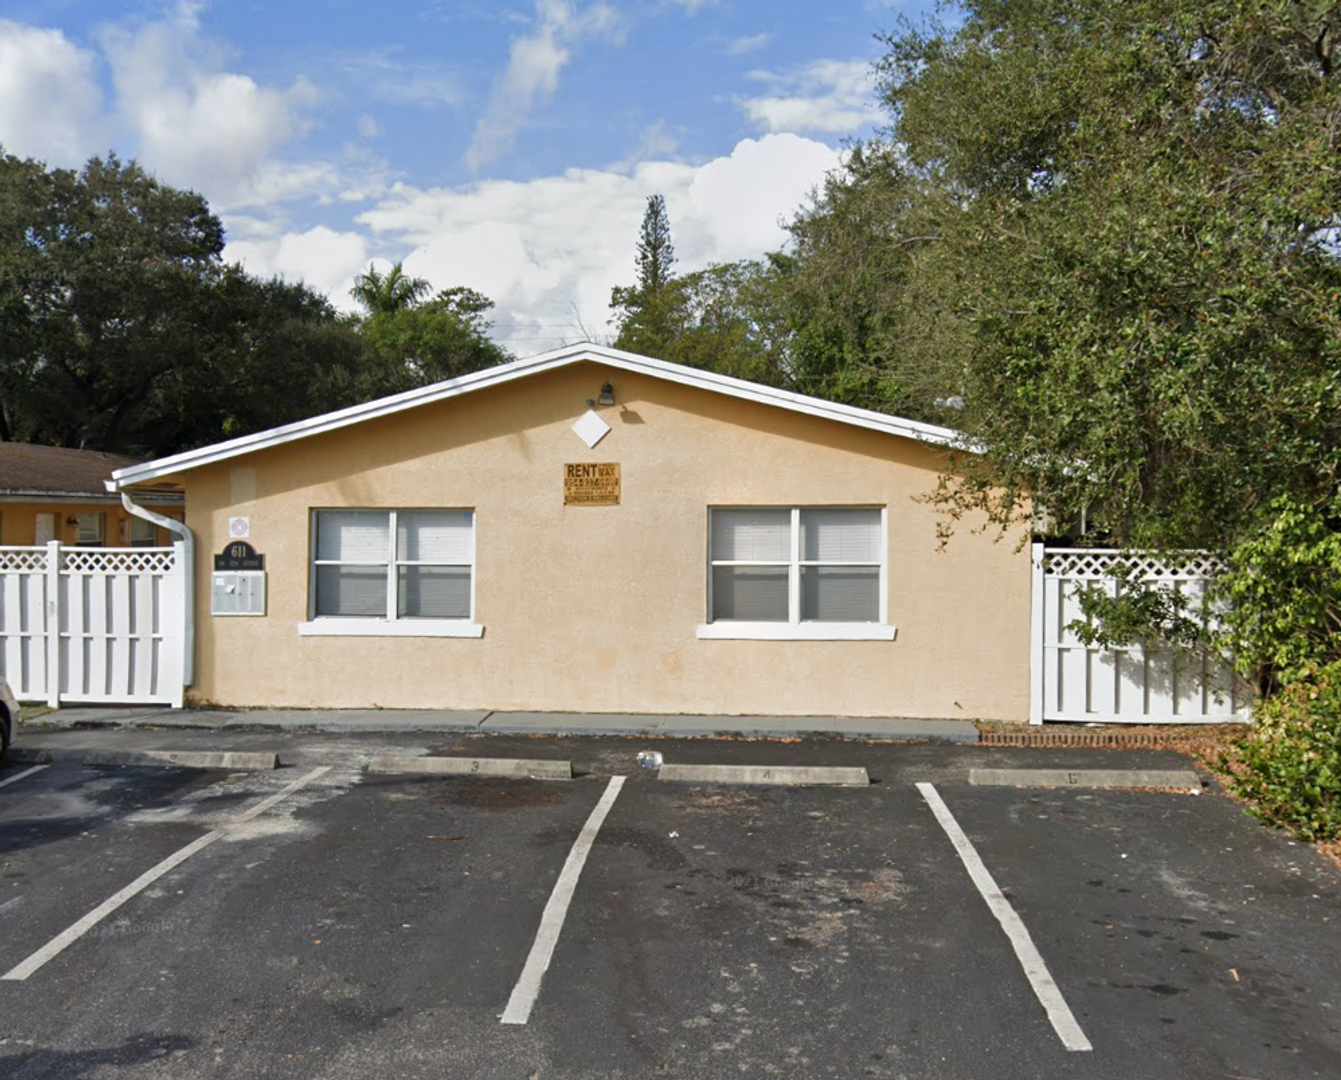 611 SW 12 AVE -611 SW 11 AVE LLC